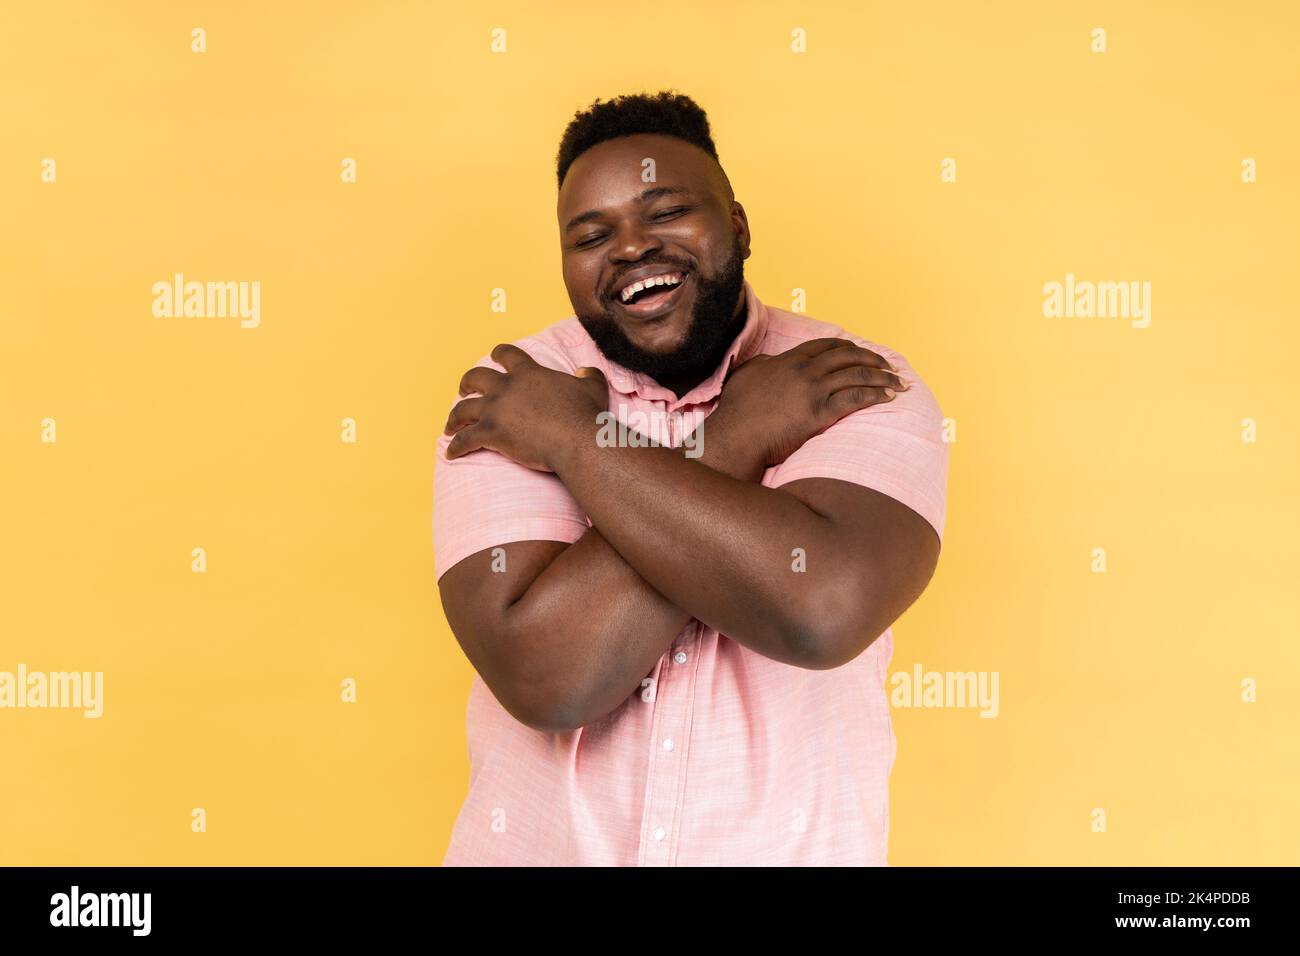 Portrait of selfish narcissistic man wearing pink shirt embracing himself and smiling with expression of great ego, pleasure and self-esteem. Indoor studio shot isolated on yellow background. Stock Photo